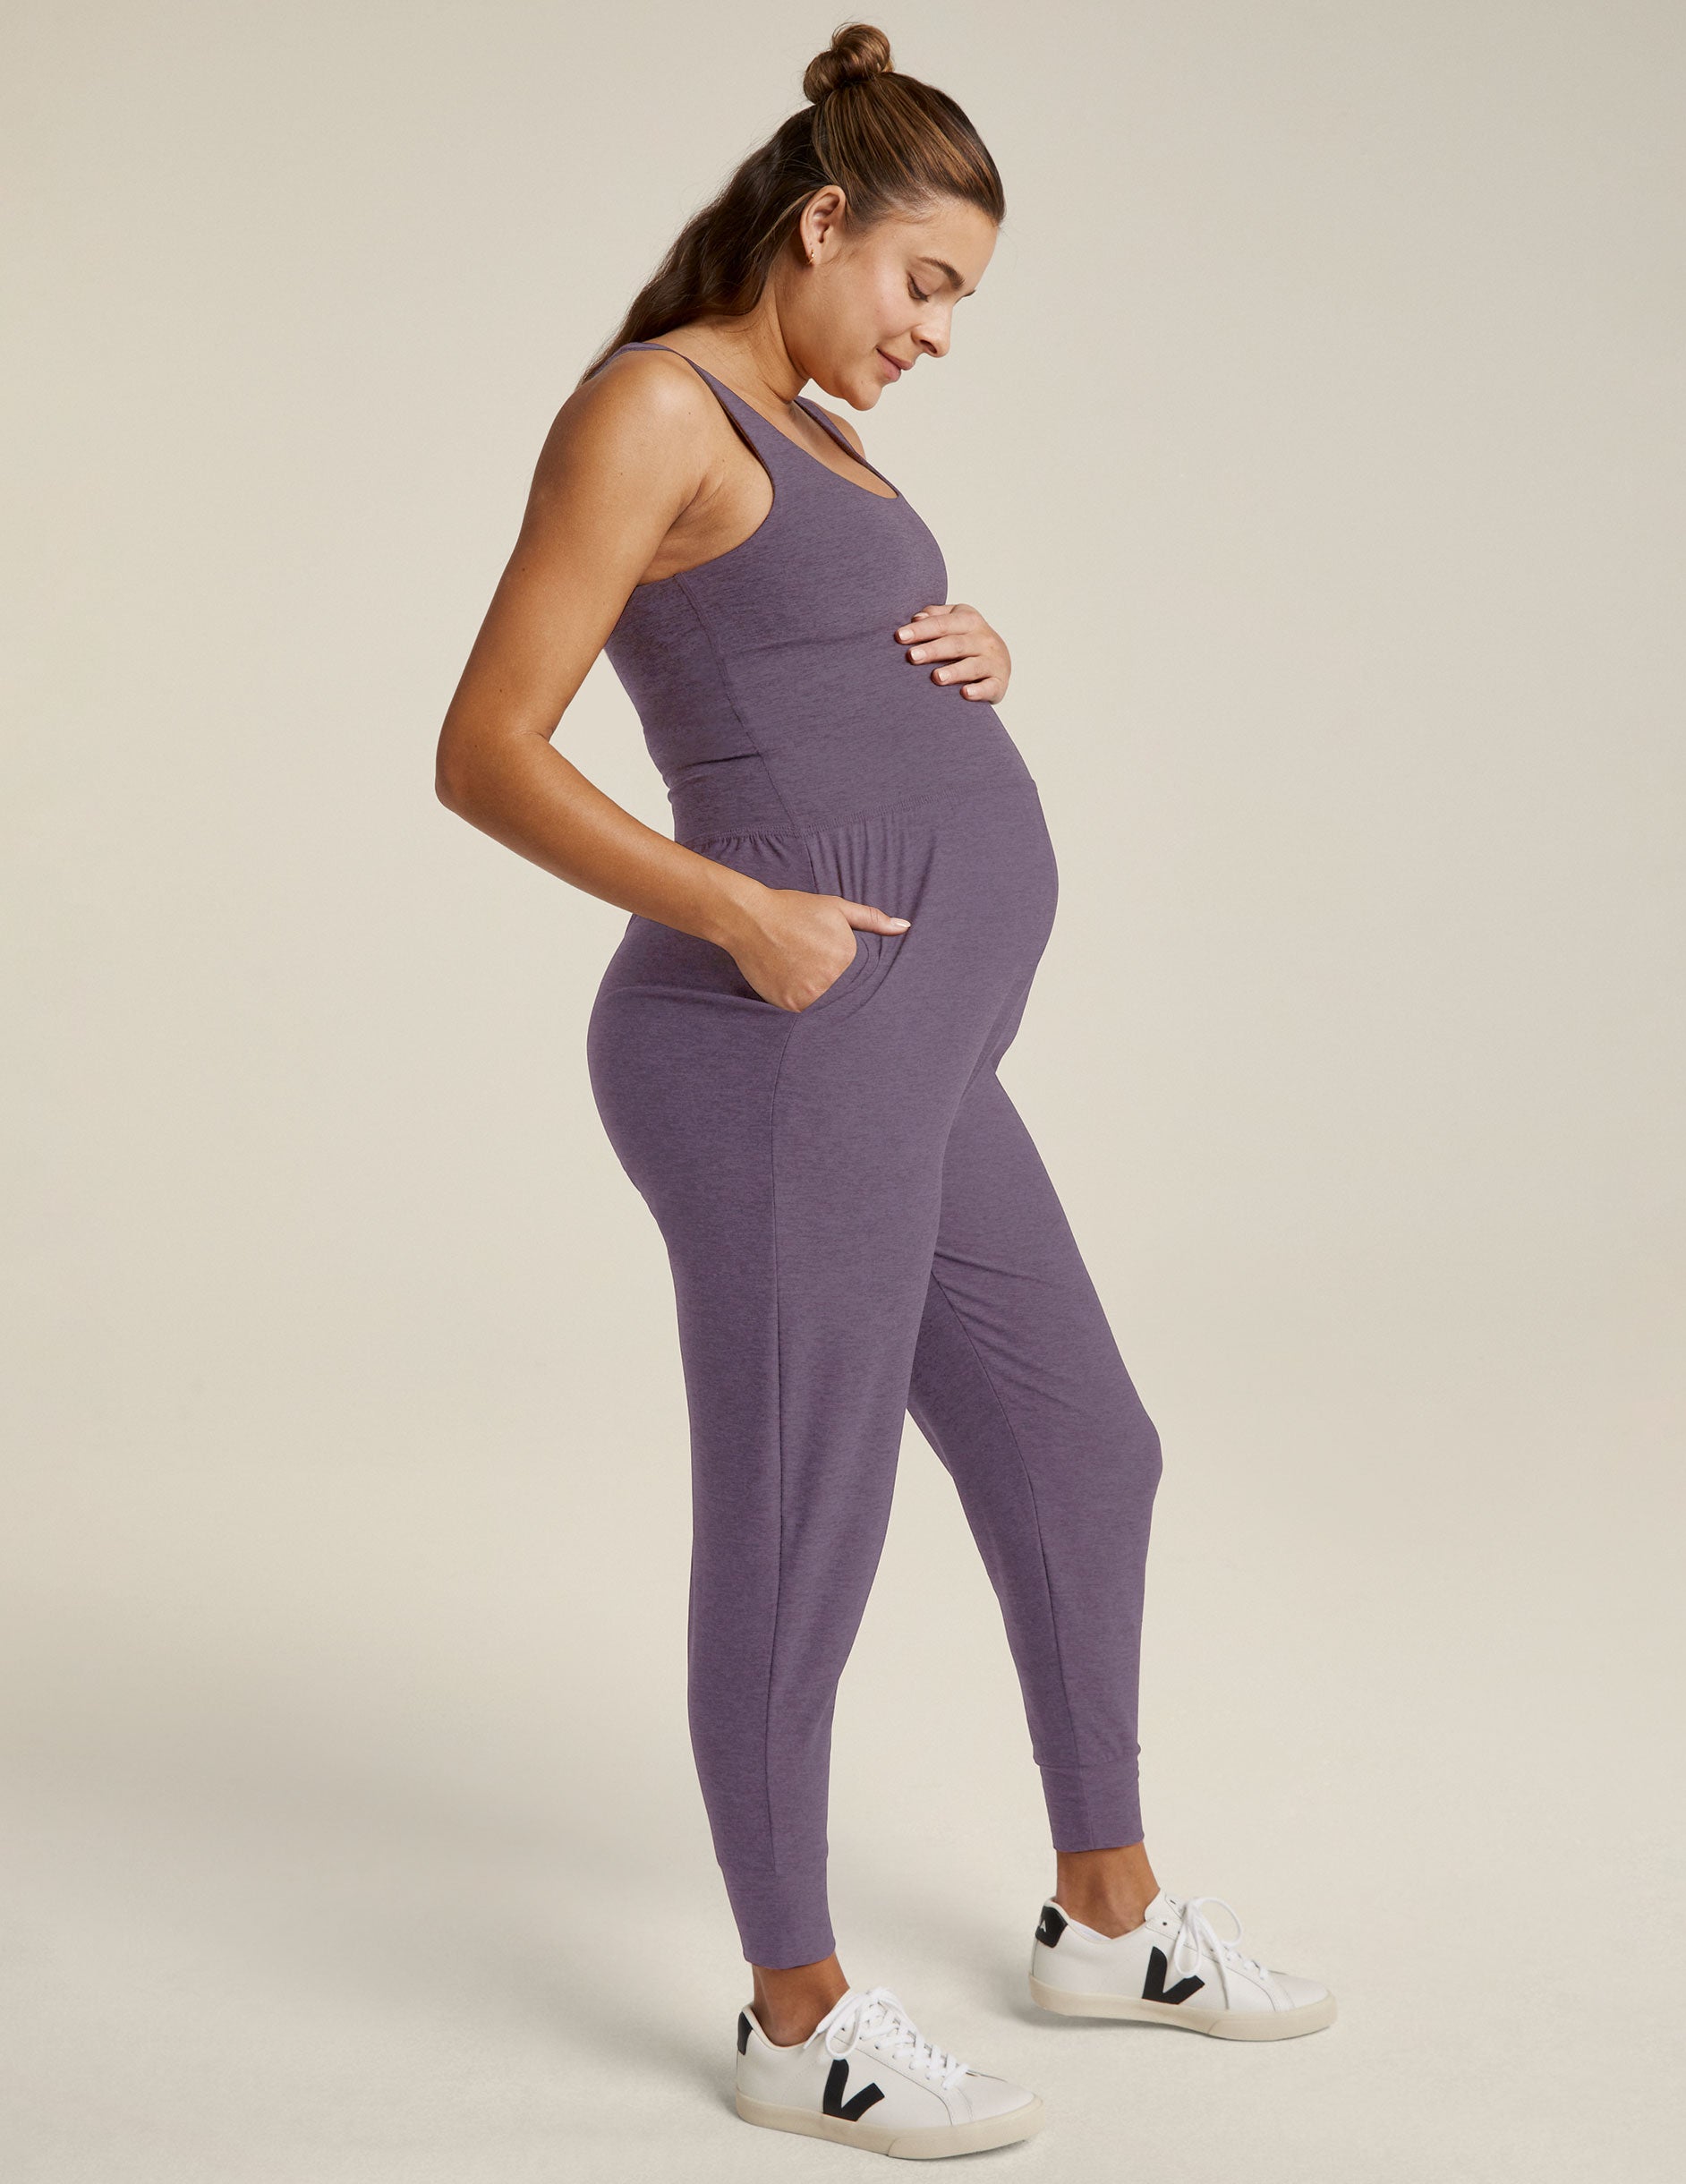 purple maternity spacedye jogger style jumpsuit with tank top straps. 